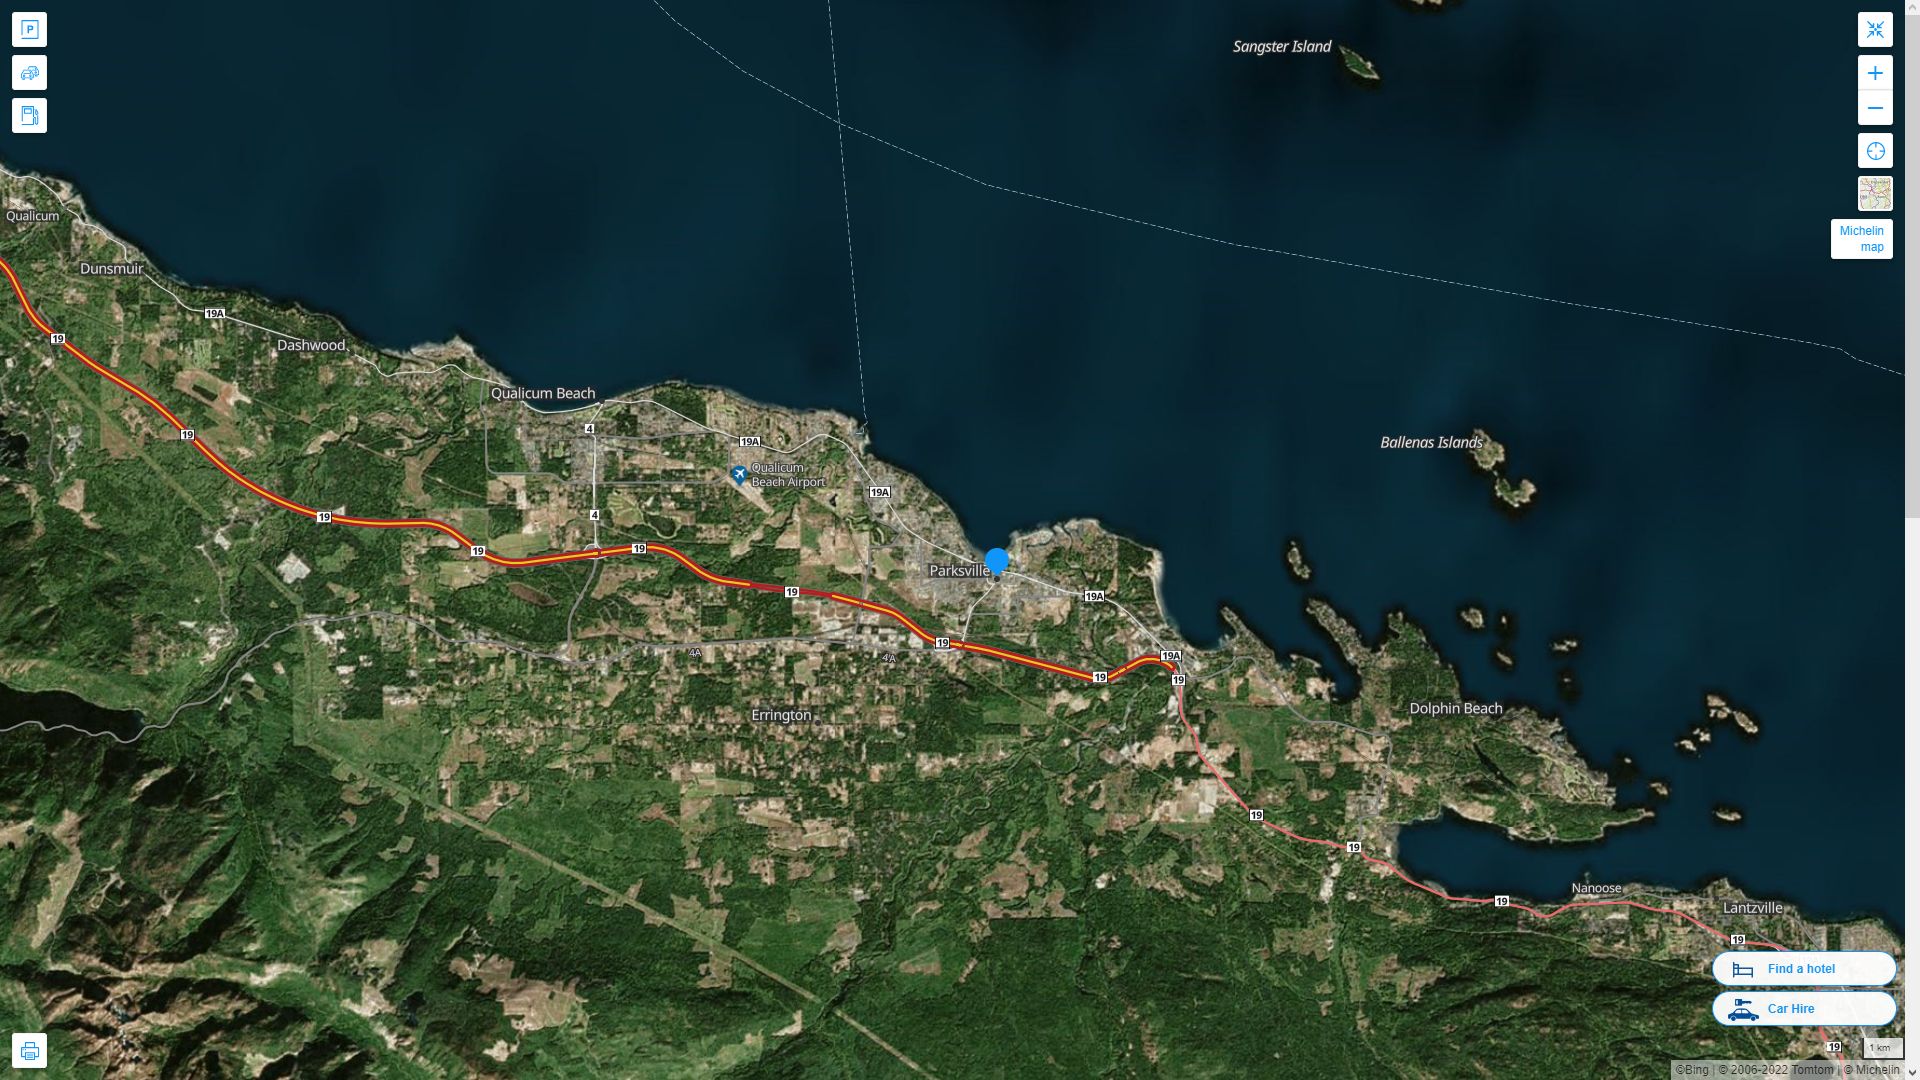 Parksville Highway and Road Map with Satellite View